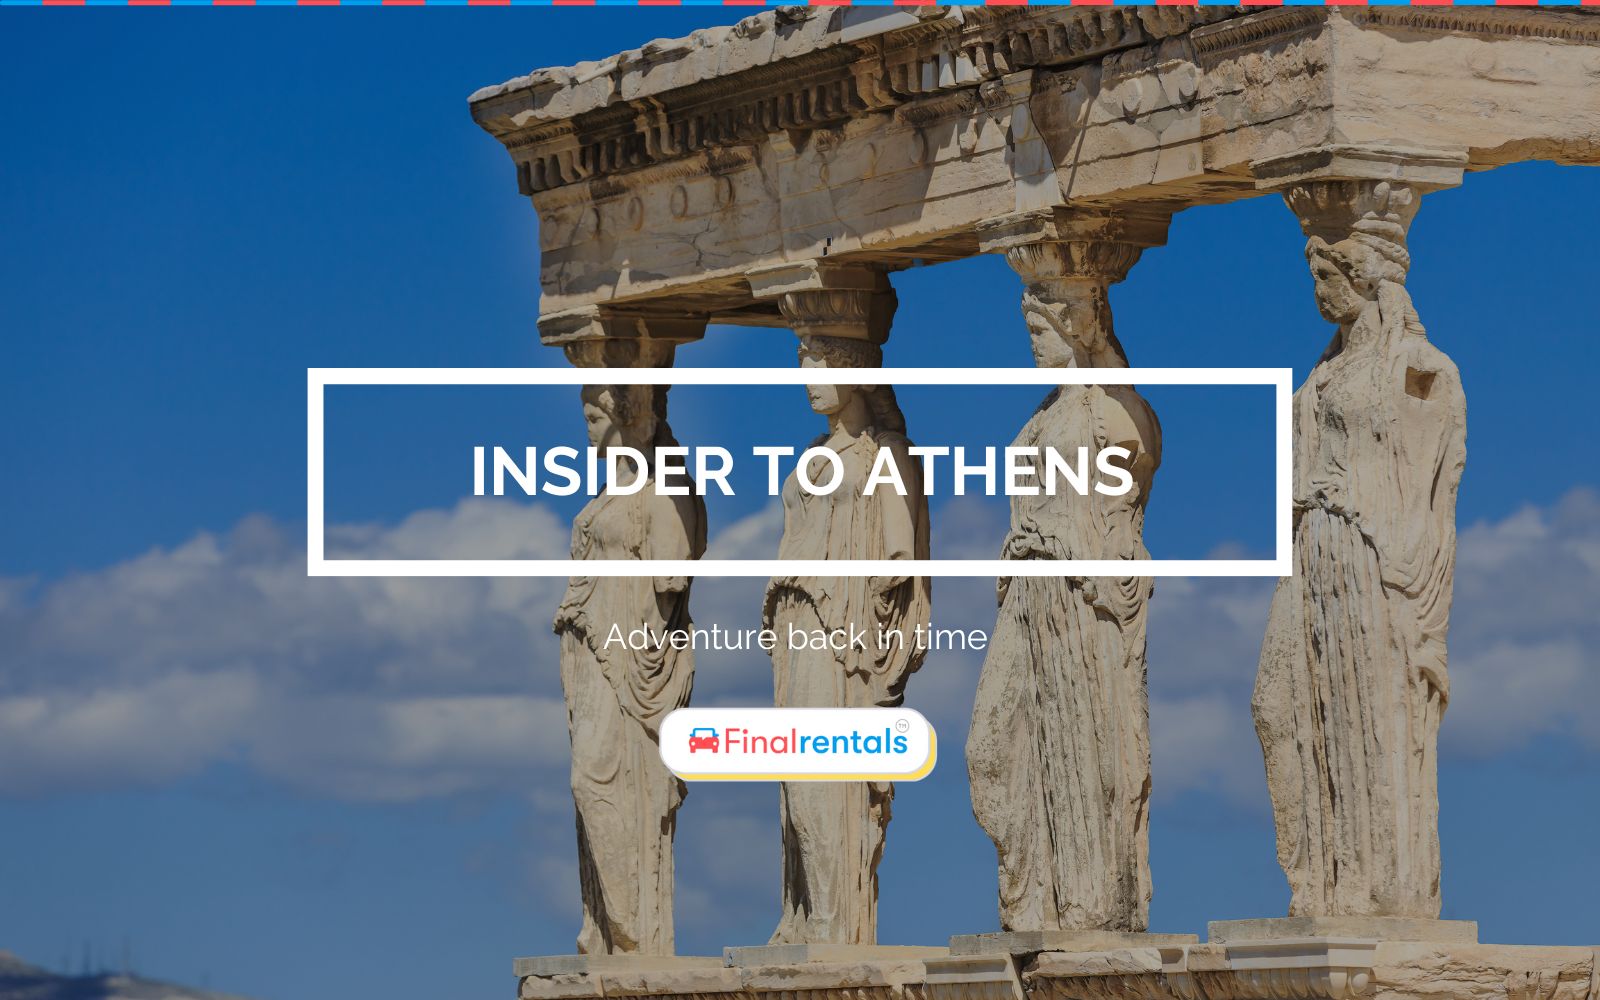 The Insider to Athens